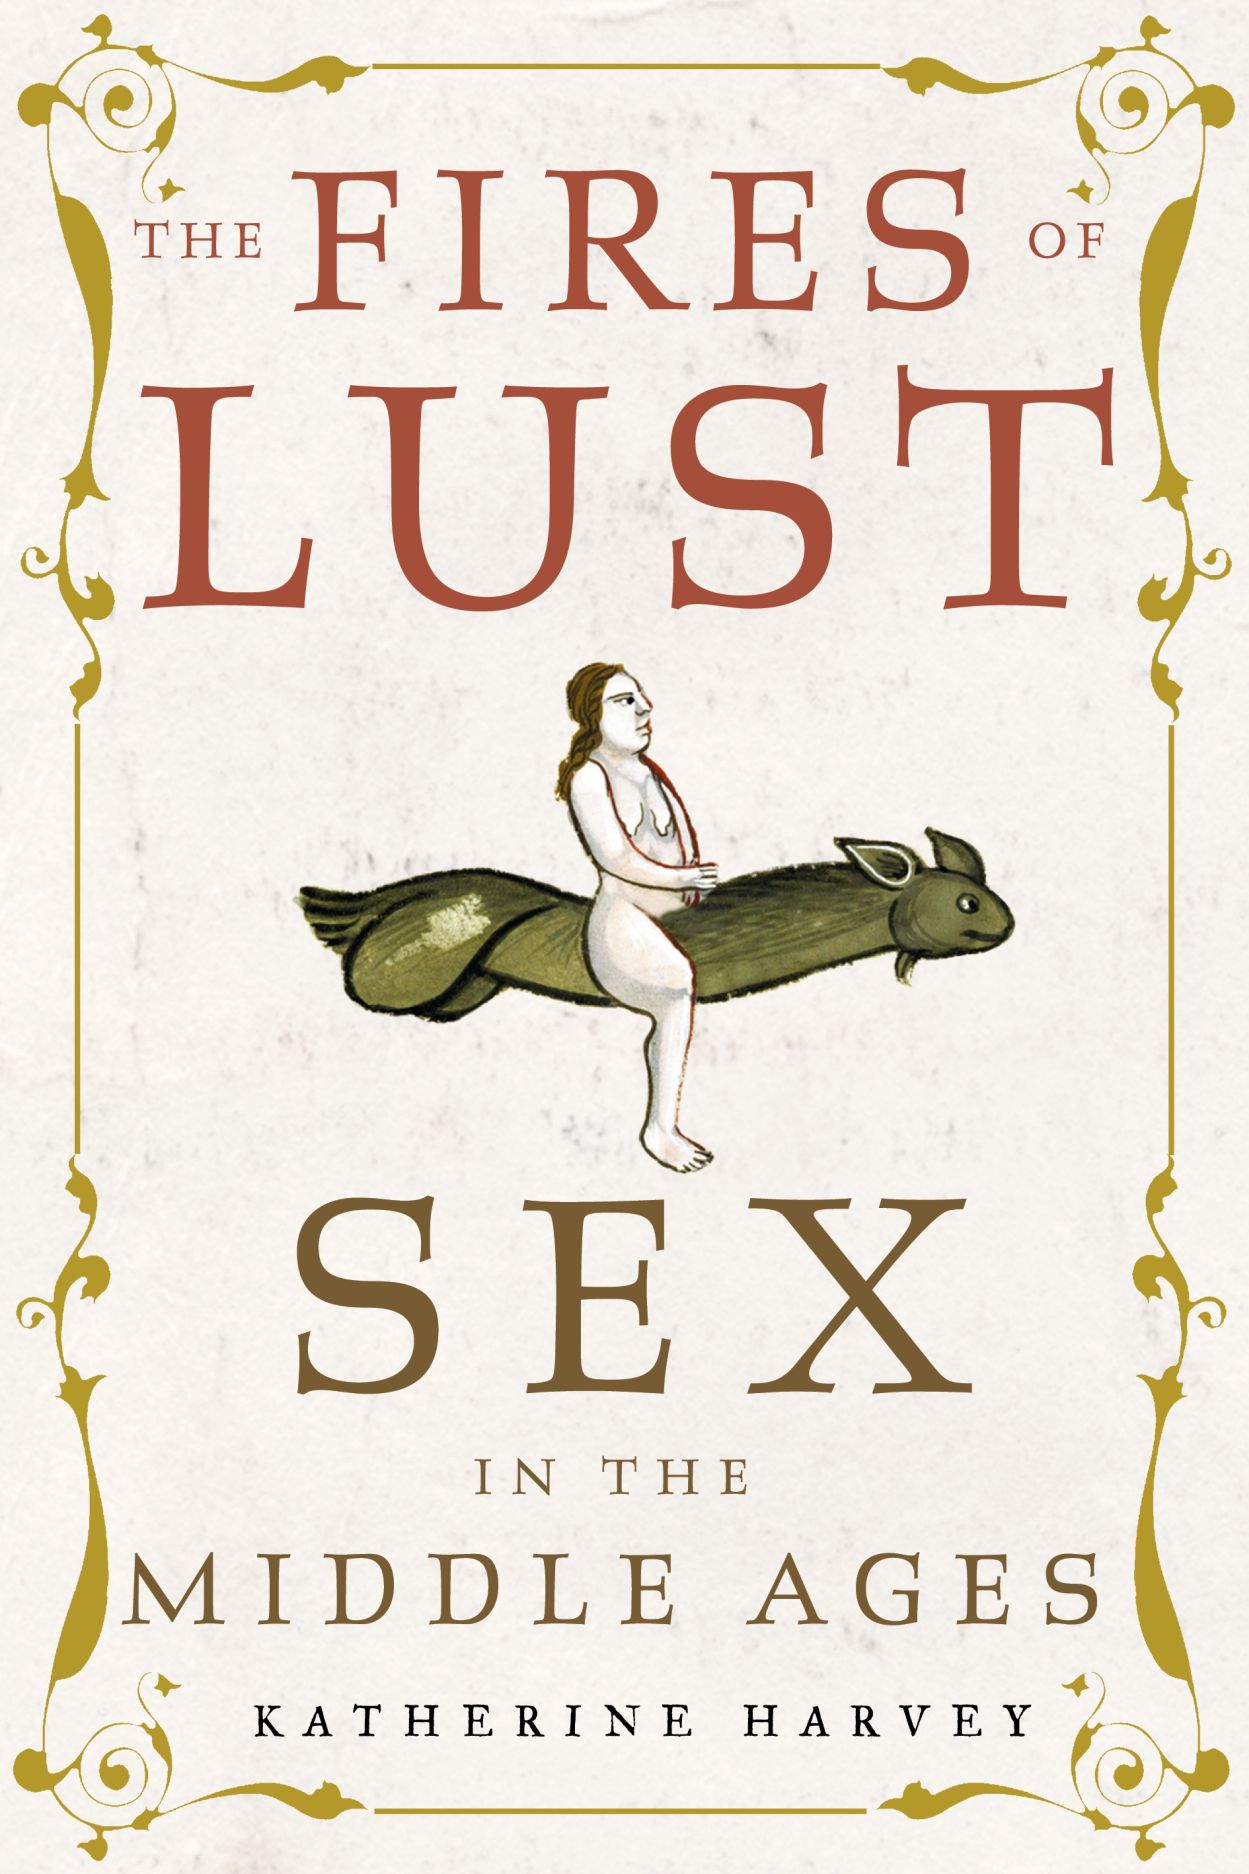 Touch of lust a How to